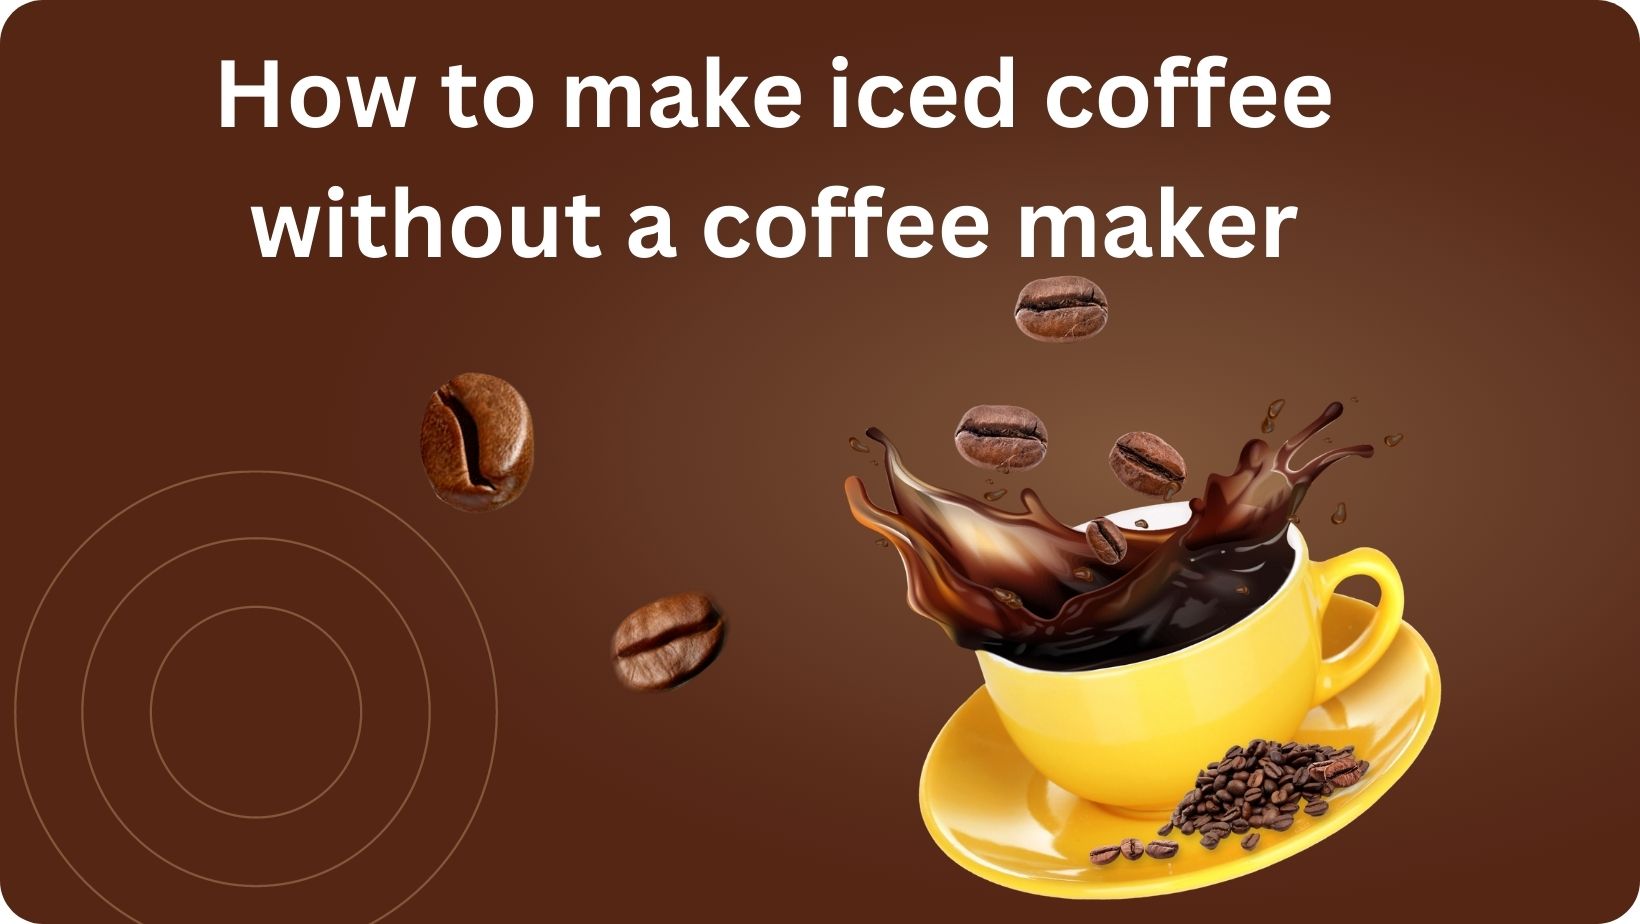 How to make iced coffee without a coffee maker